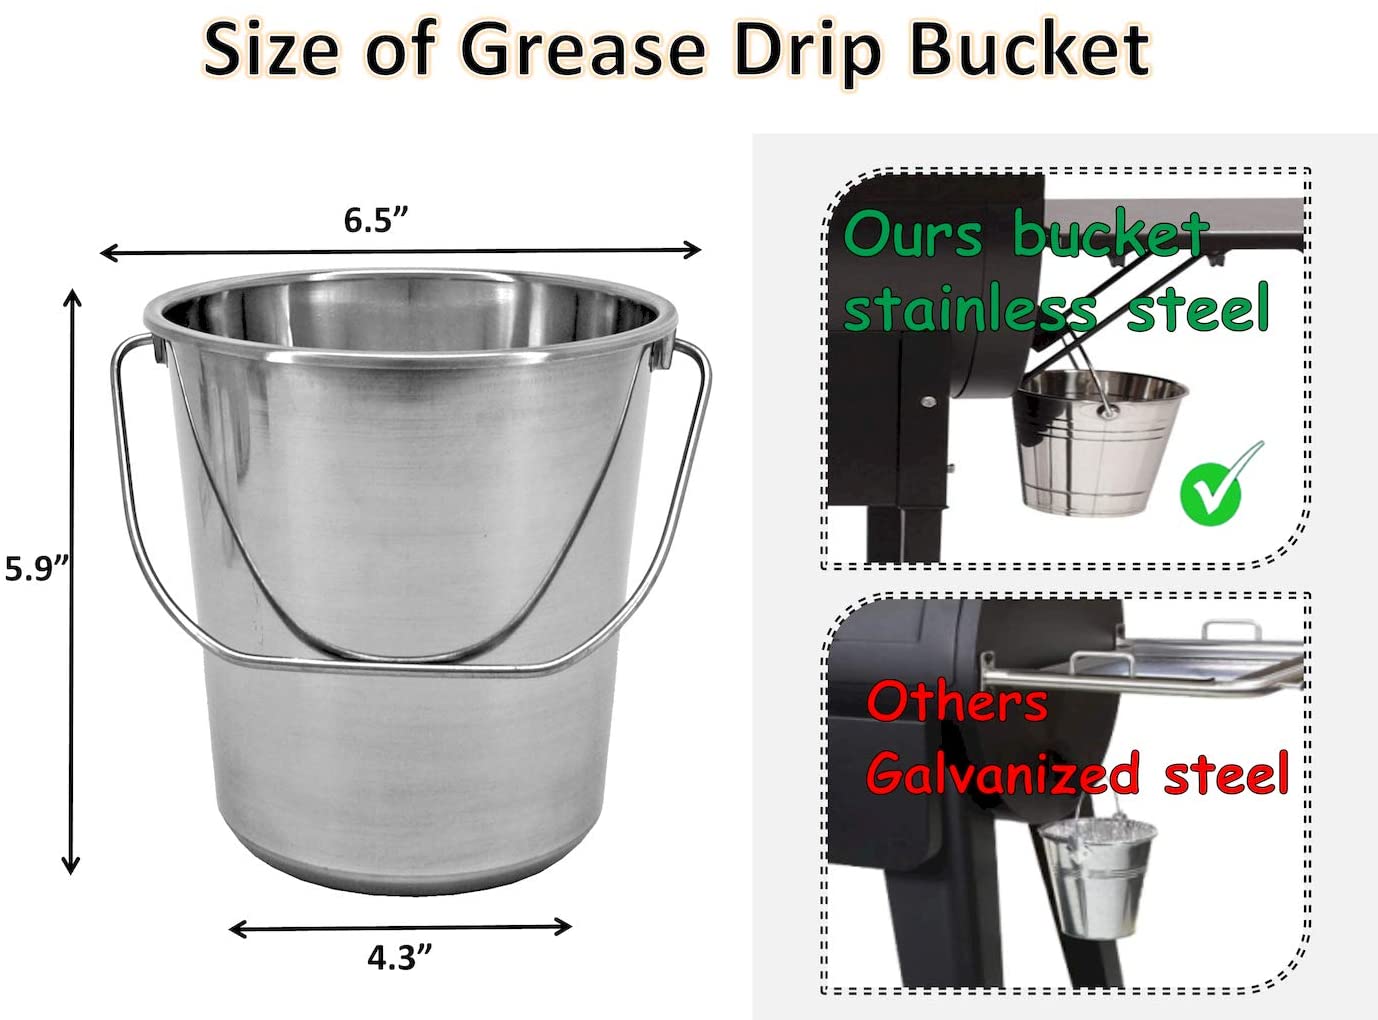 Grease Bucket with Aluminum Foil Liners and Meat Probe Fit for Pit Boss Wood Pellet Grill